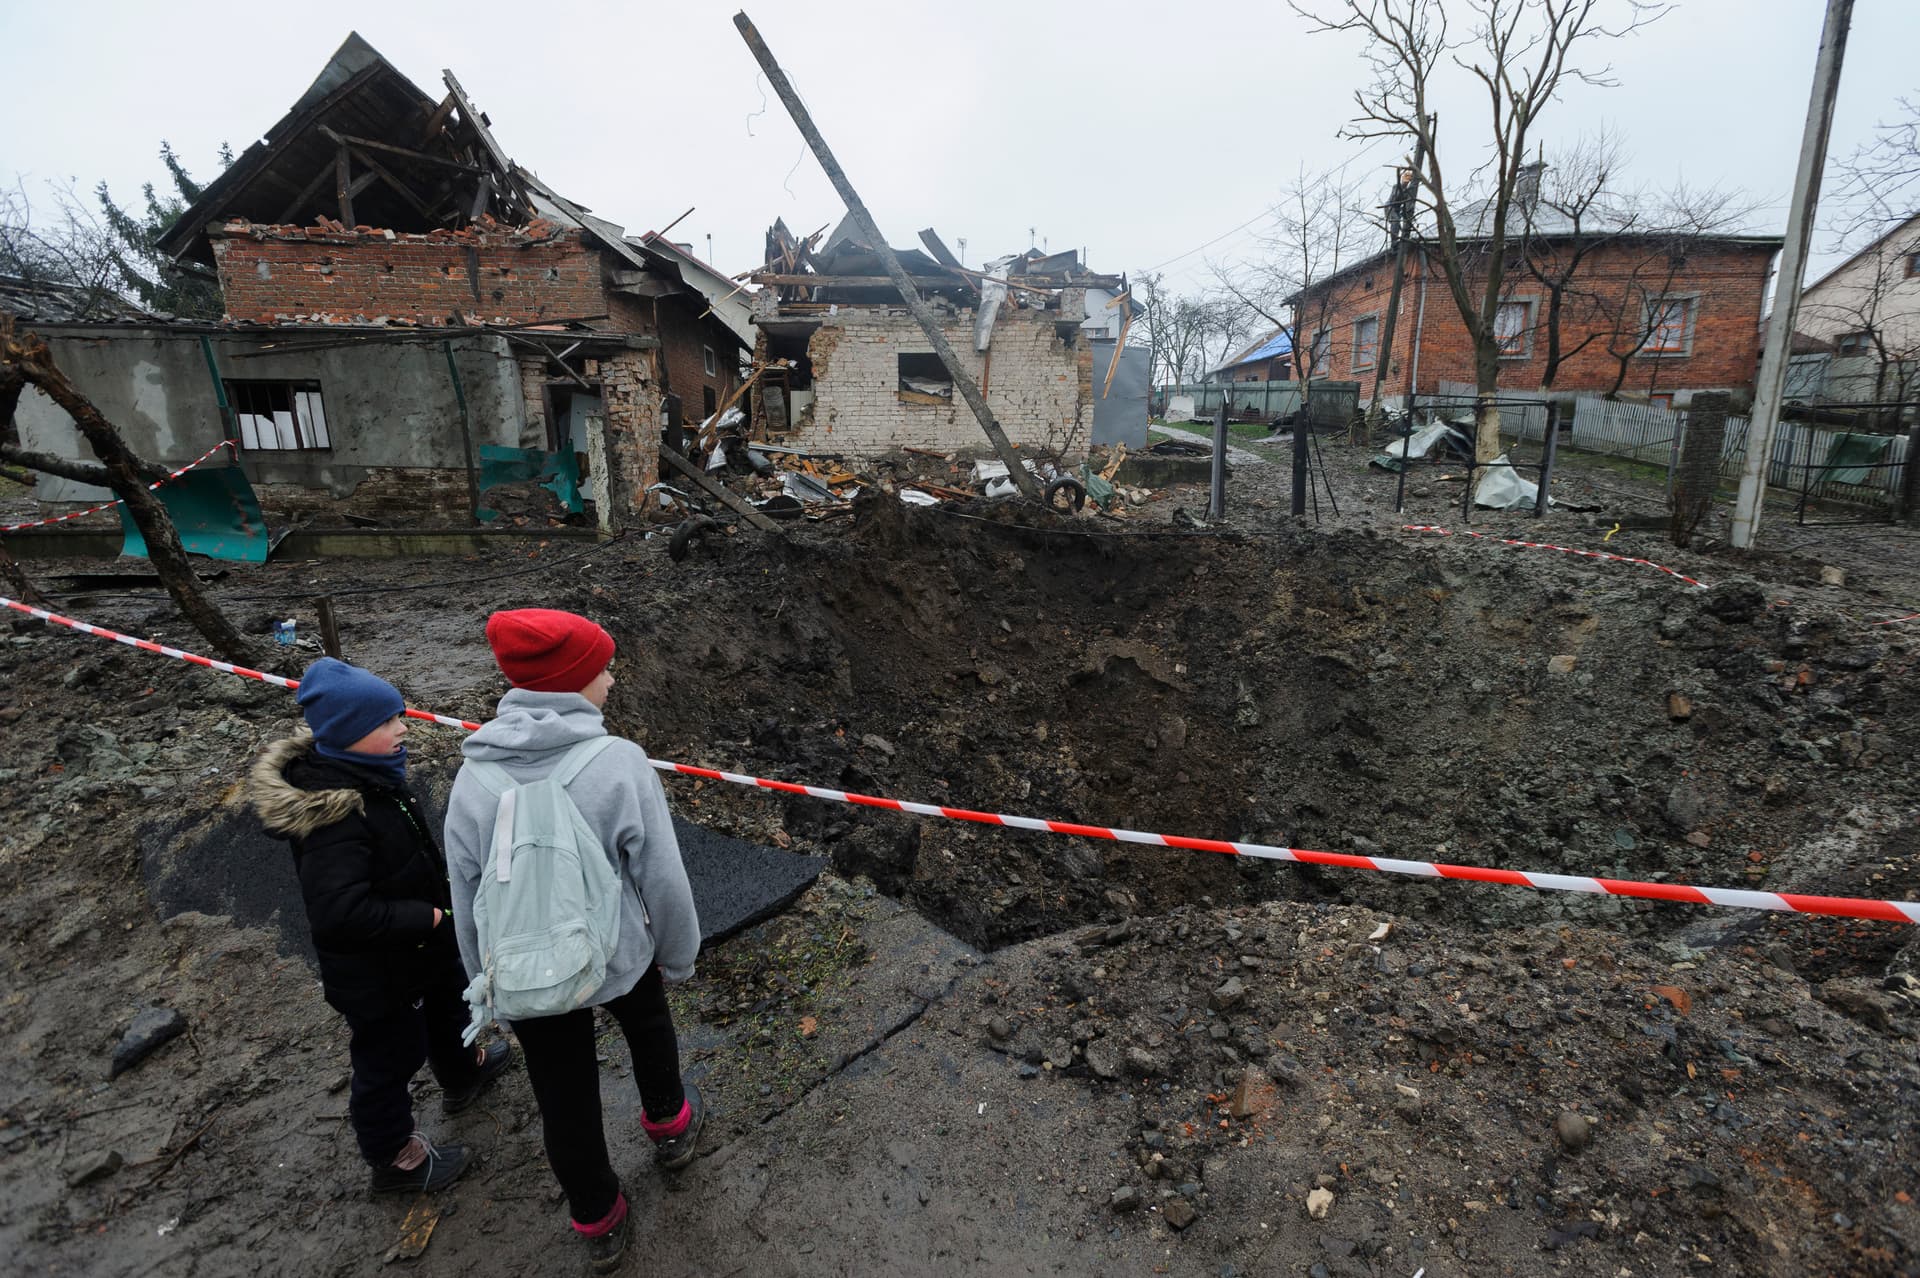 Children look at a crater created by an explosion in a residential area after Russian shelling in Solonka, Lviv region